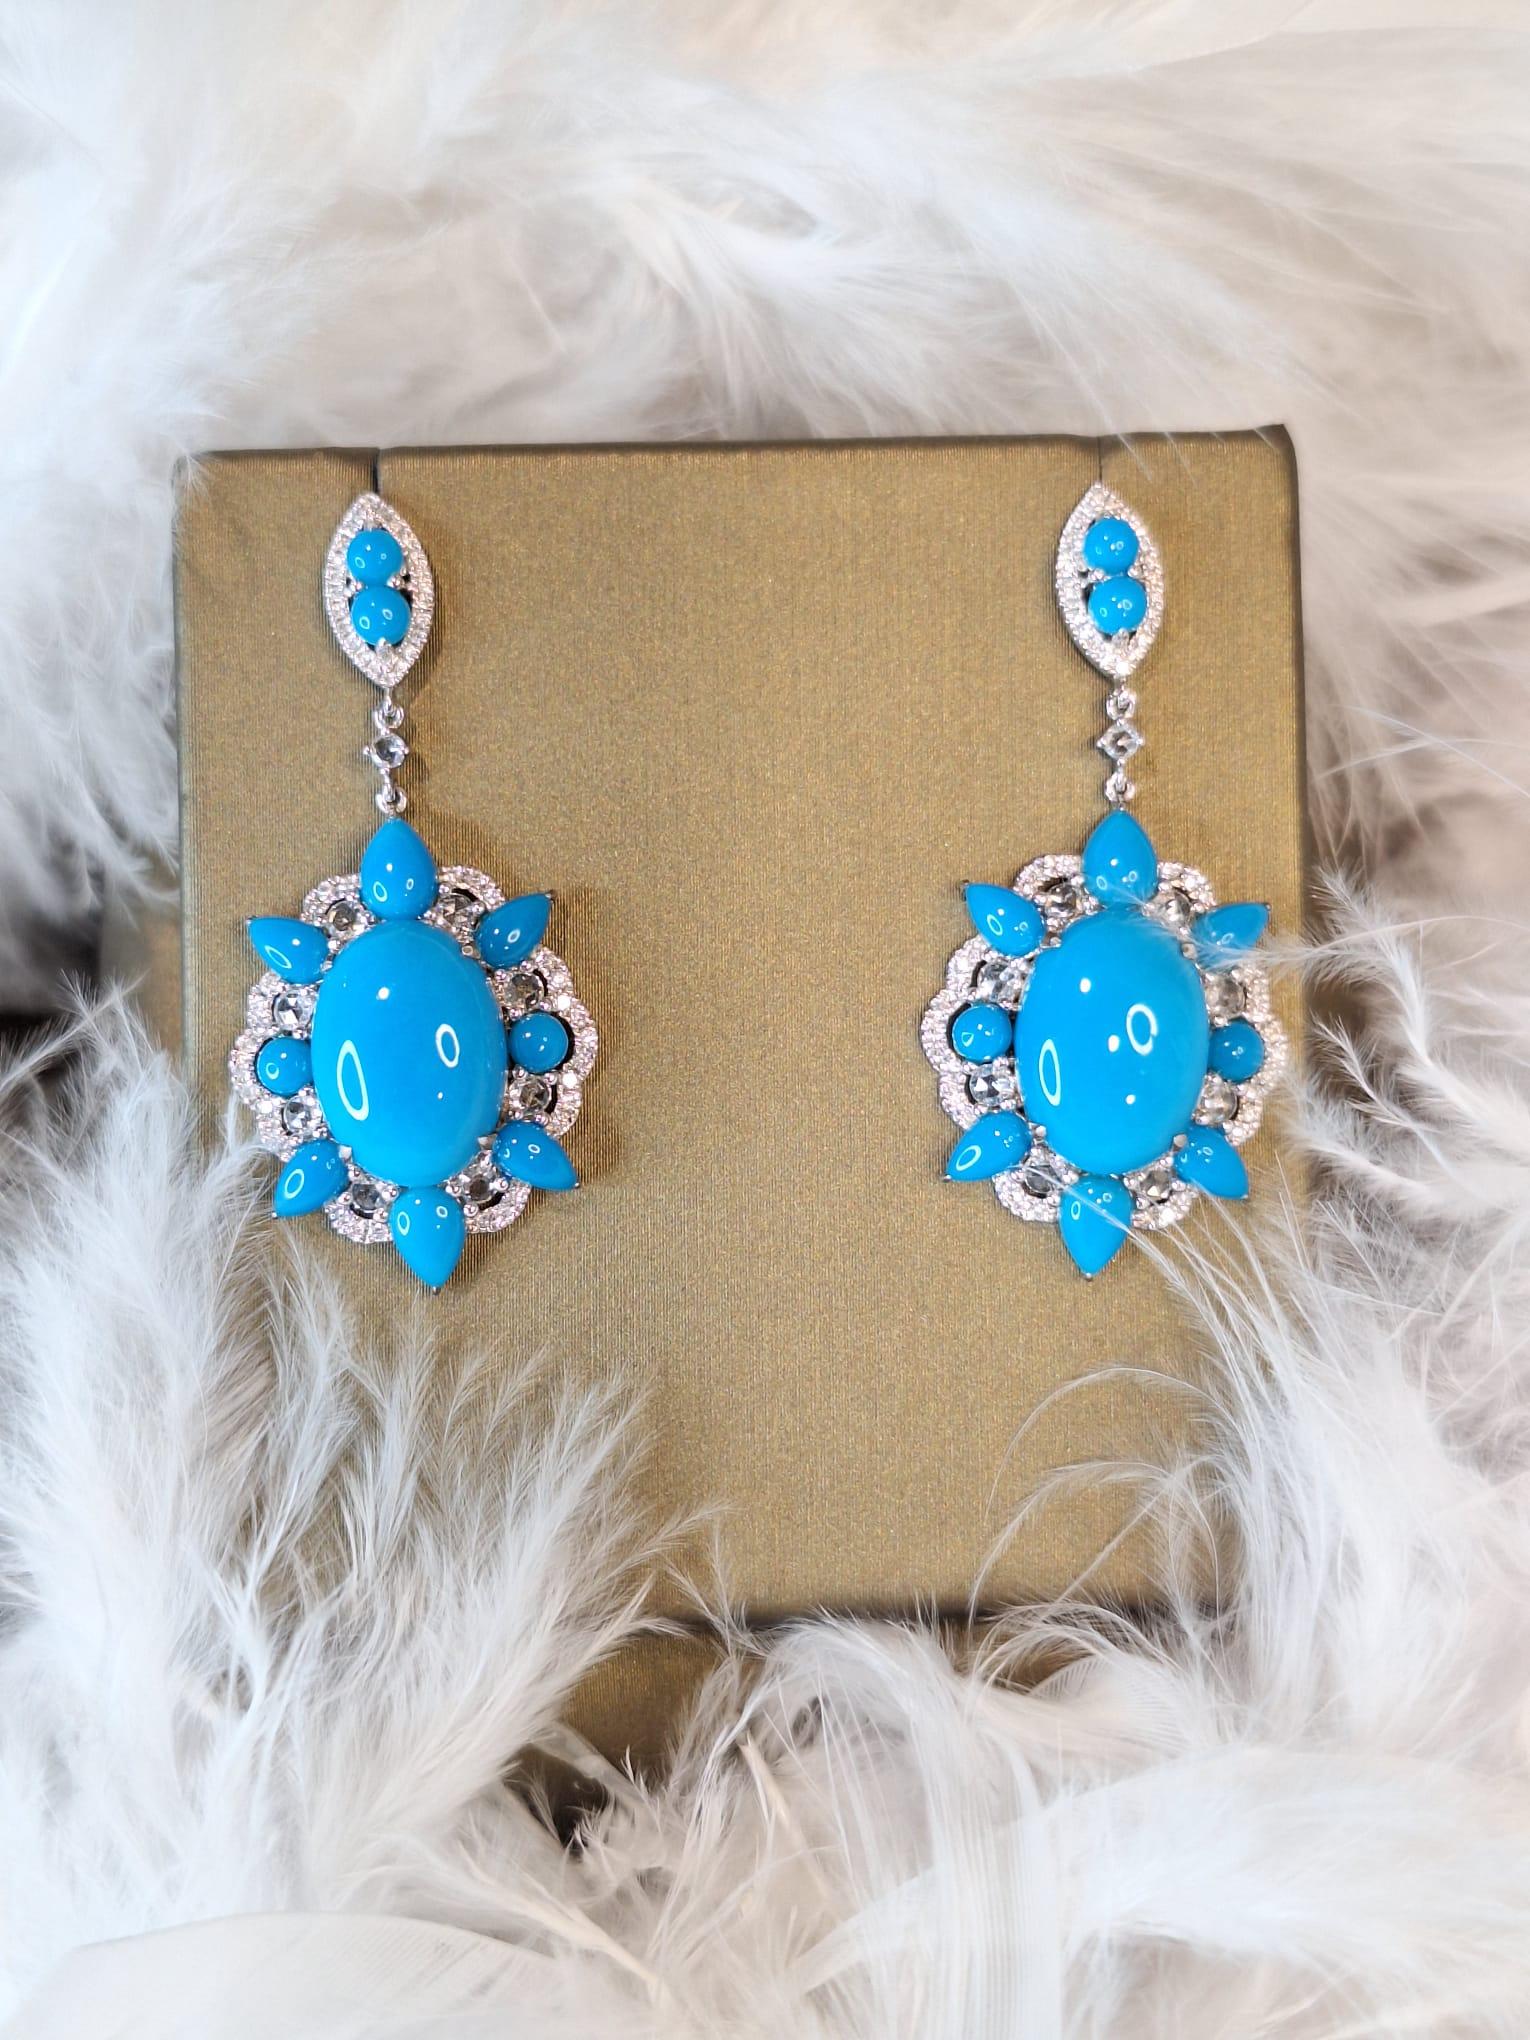 18K White Gold Diamond Earring with Turquoise

Turquoise is known for its ability to cleanse negative energy, bring good fortune.

Diamonds symbolise clarity and purity, also represent innocence, strength, and true love.

The earring setting with